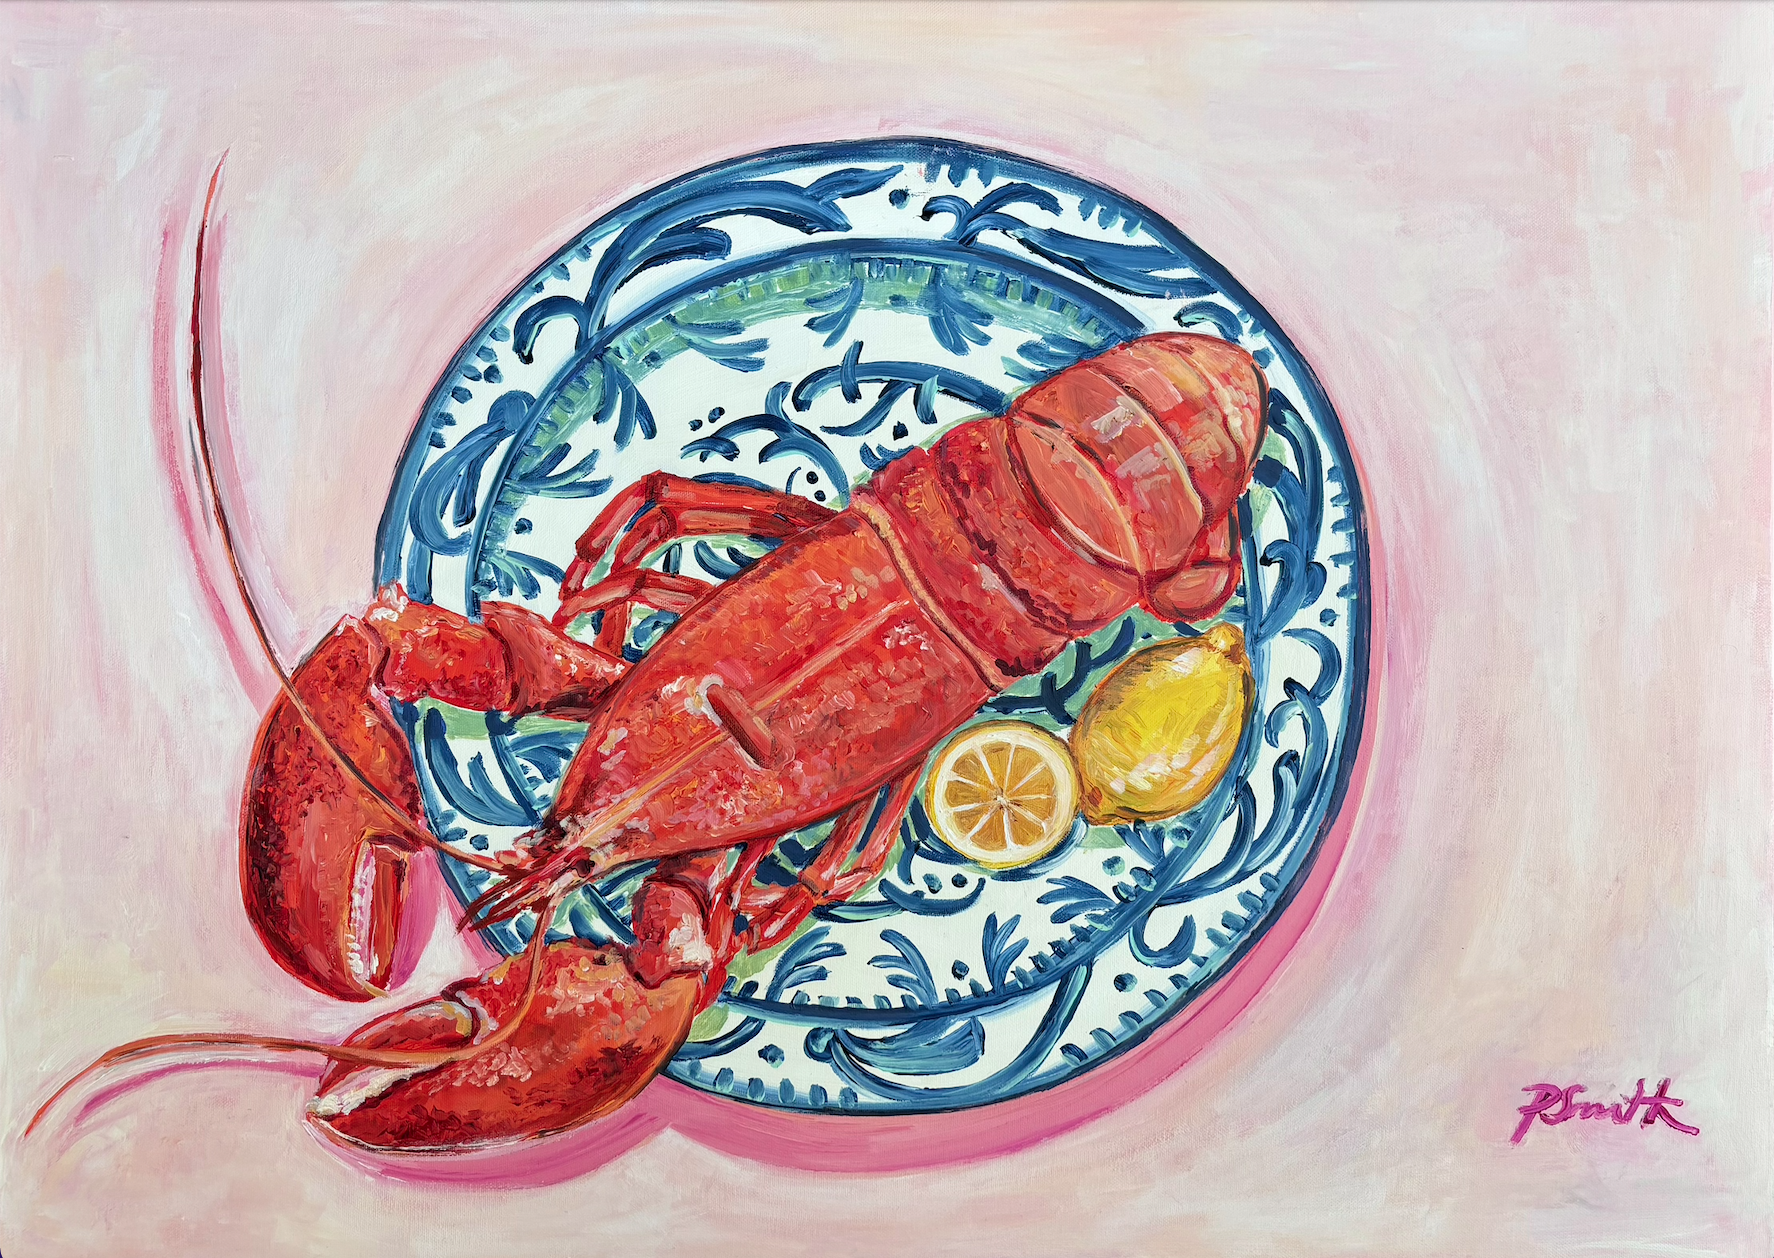 Large Lobster on Blue & White Plate by Pippa Smith